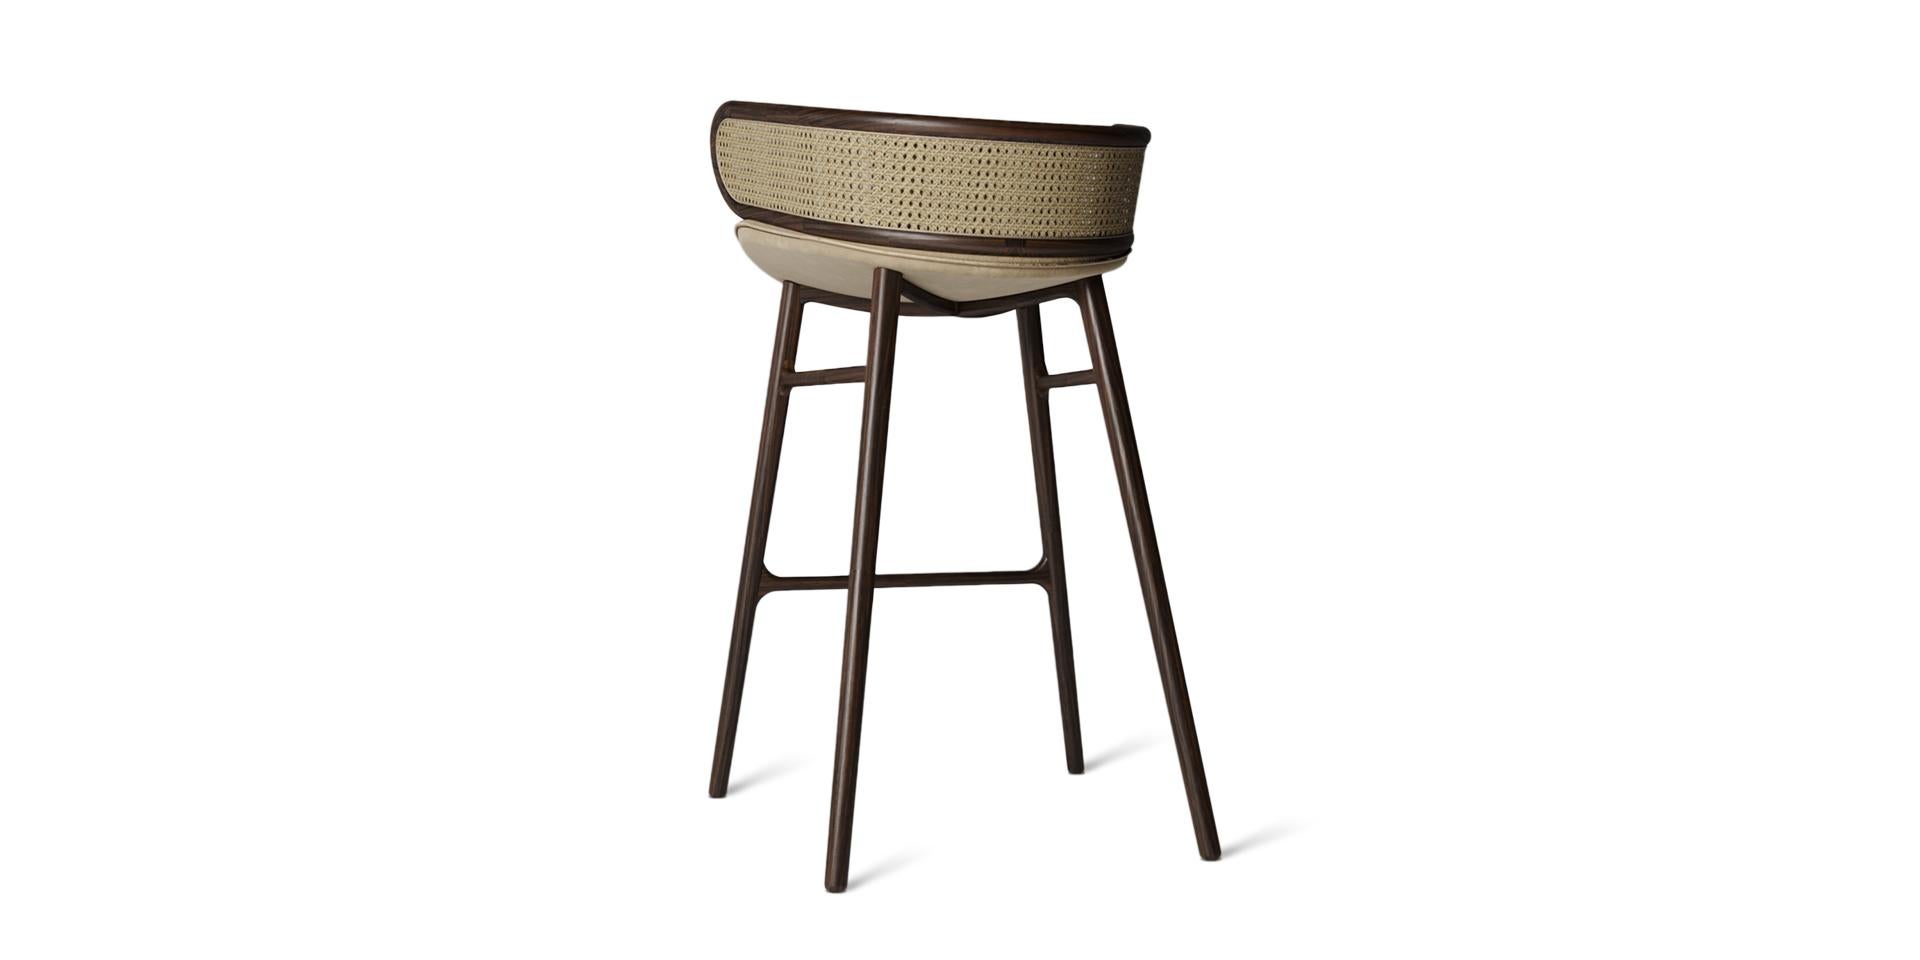 Following the same lines as the magnificent chair, the MUDHIF Bar Stool is the perfect decorative accessory to complete the look of your room. The upholstered Bar Stool presents a beautiful straw detail on the back, which wraps around its soft seat.
